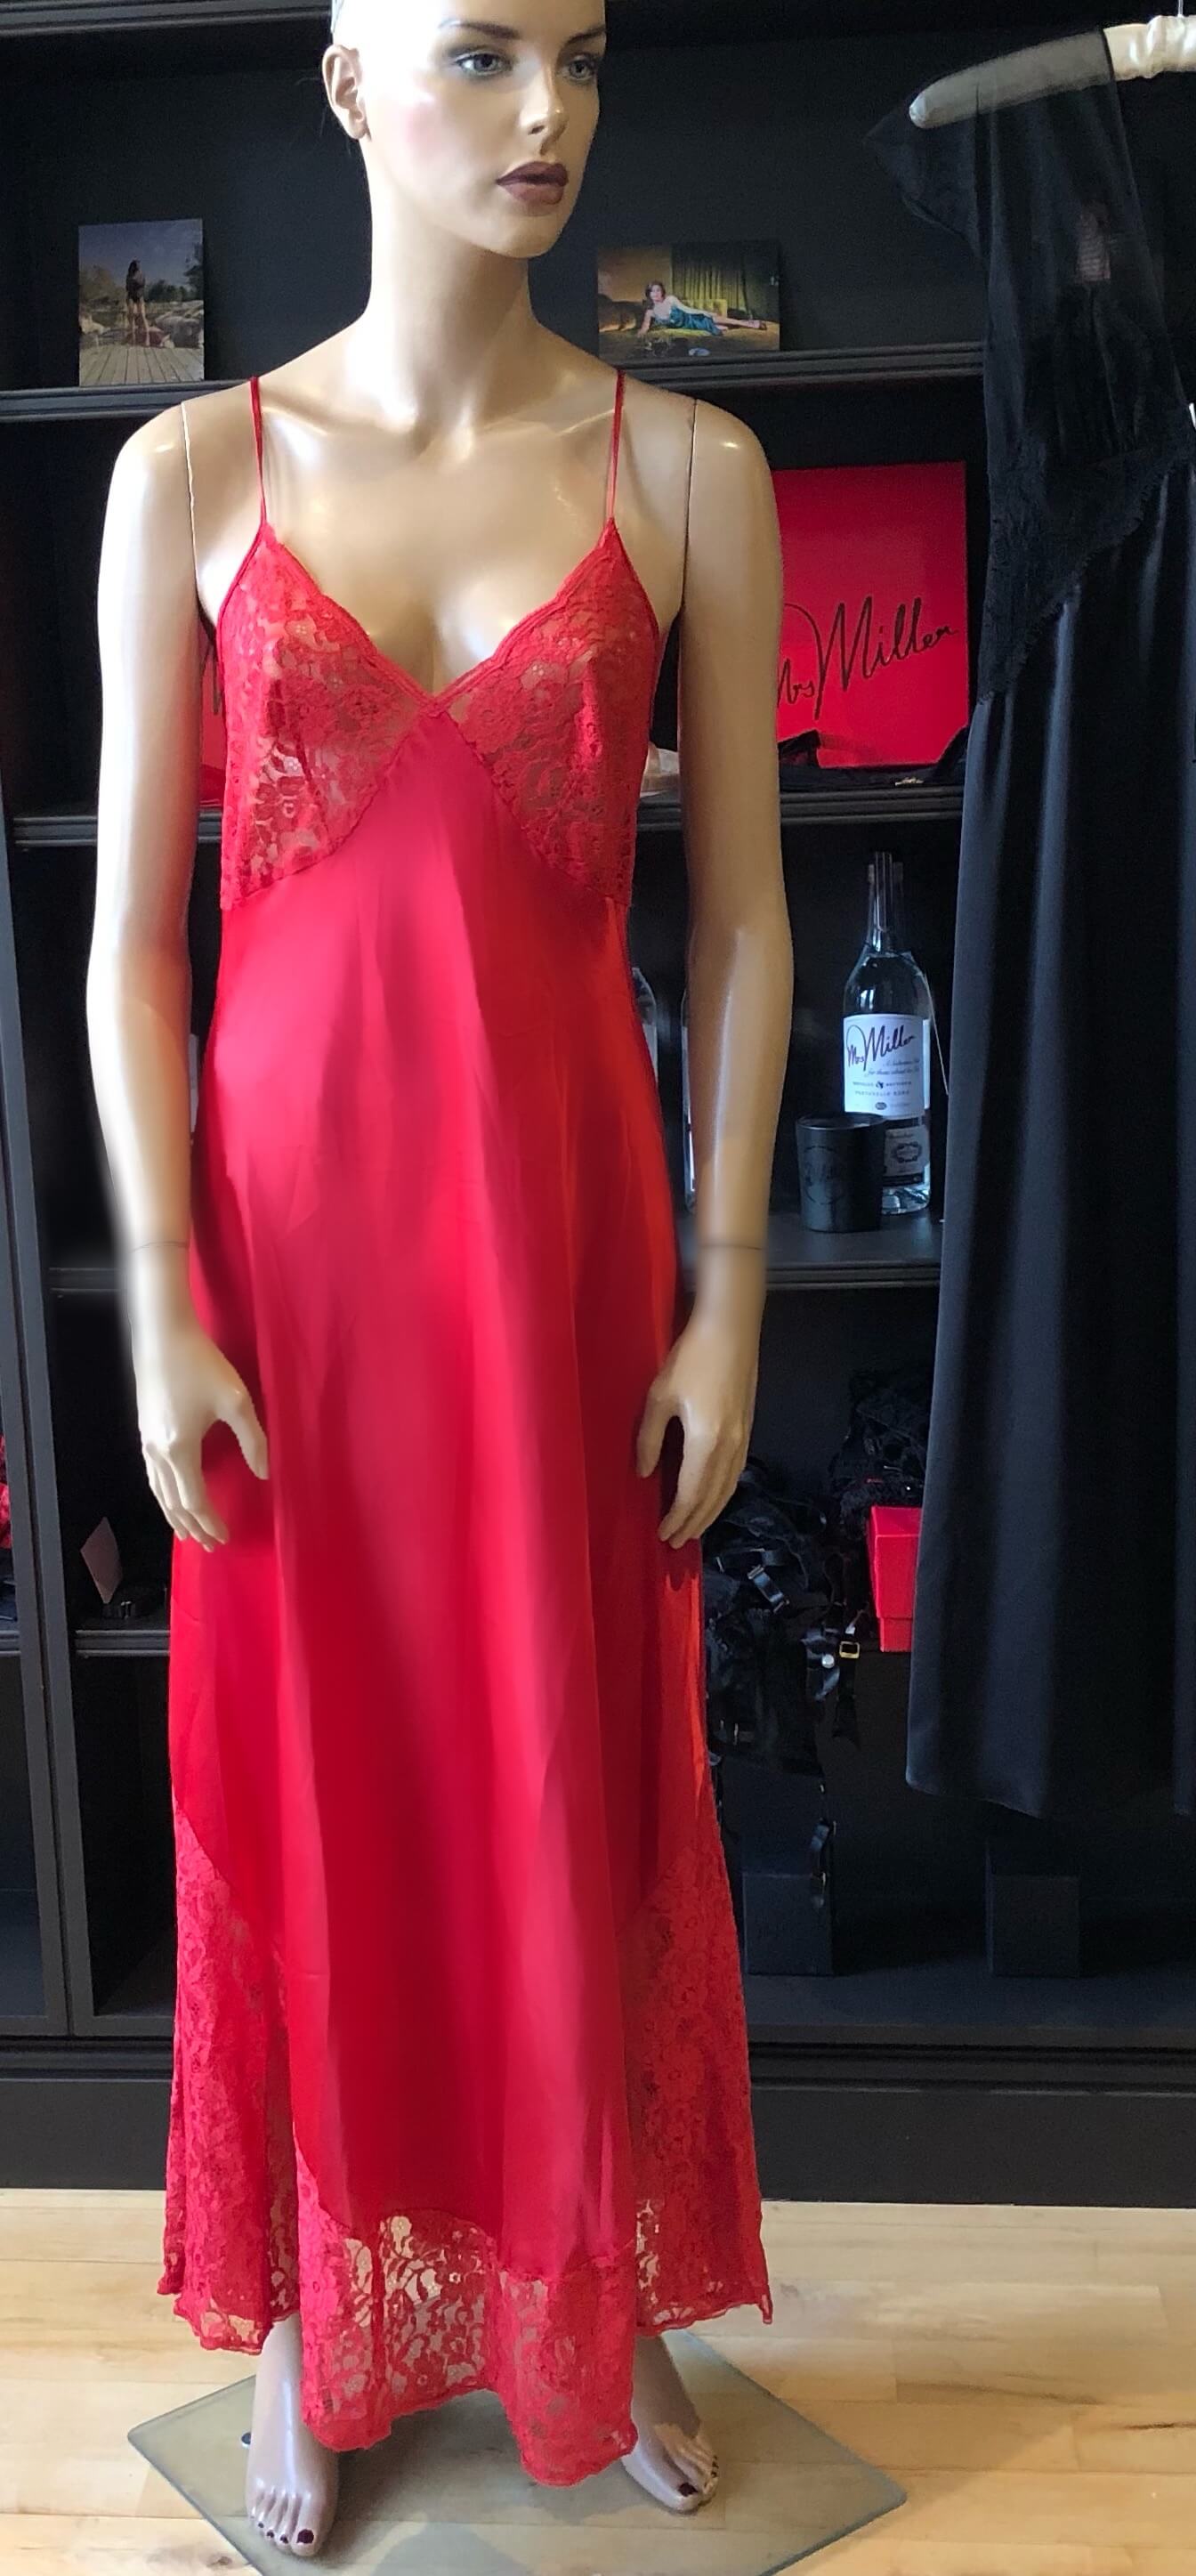 Red dress with lace detail